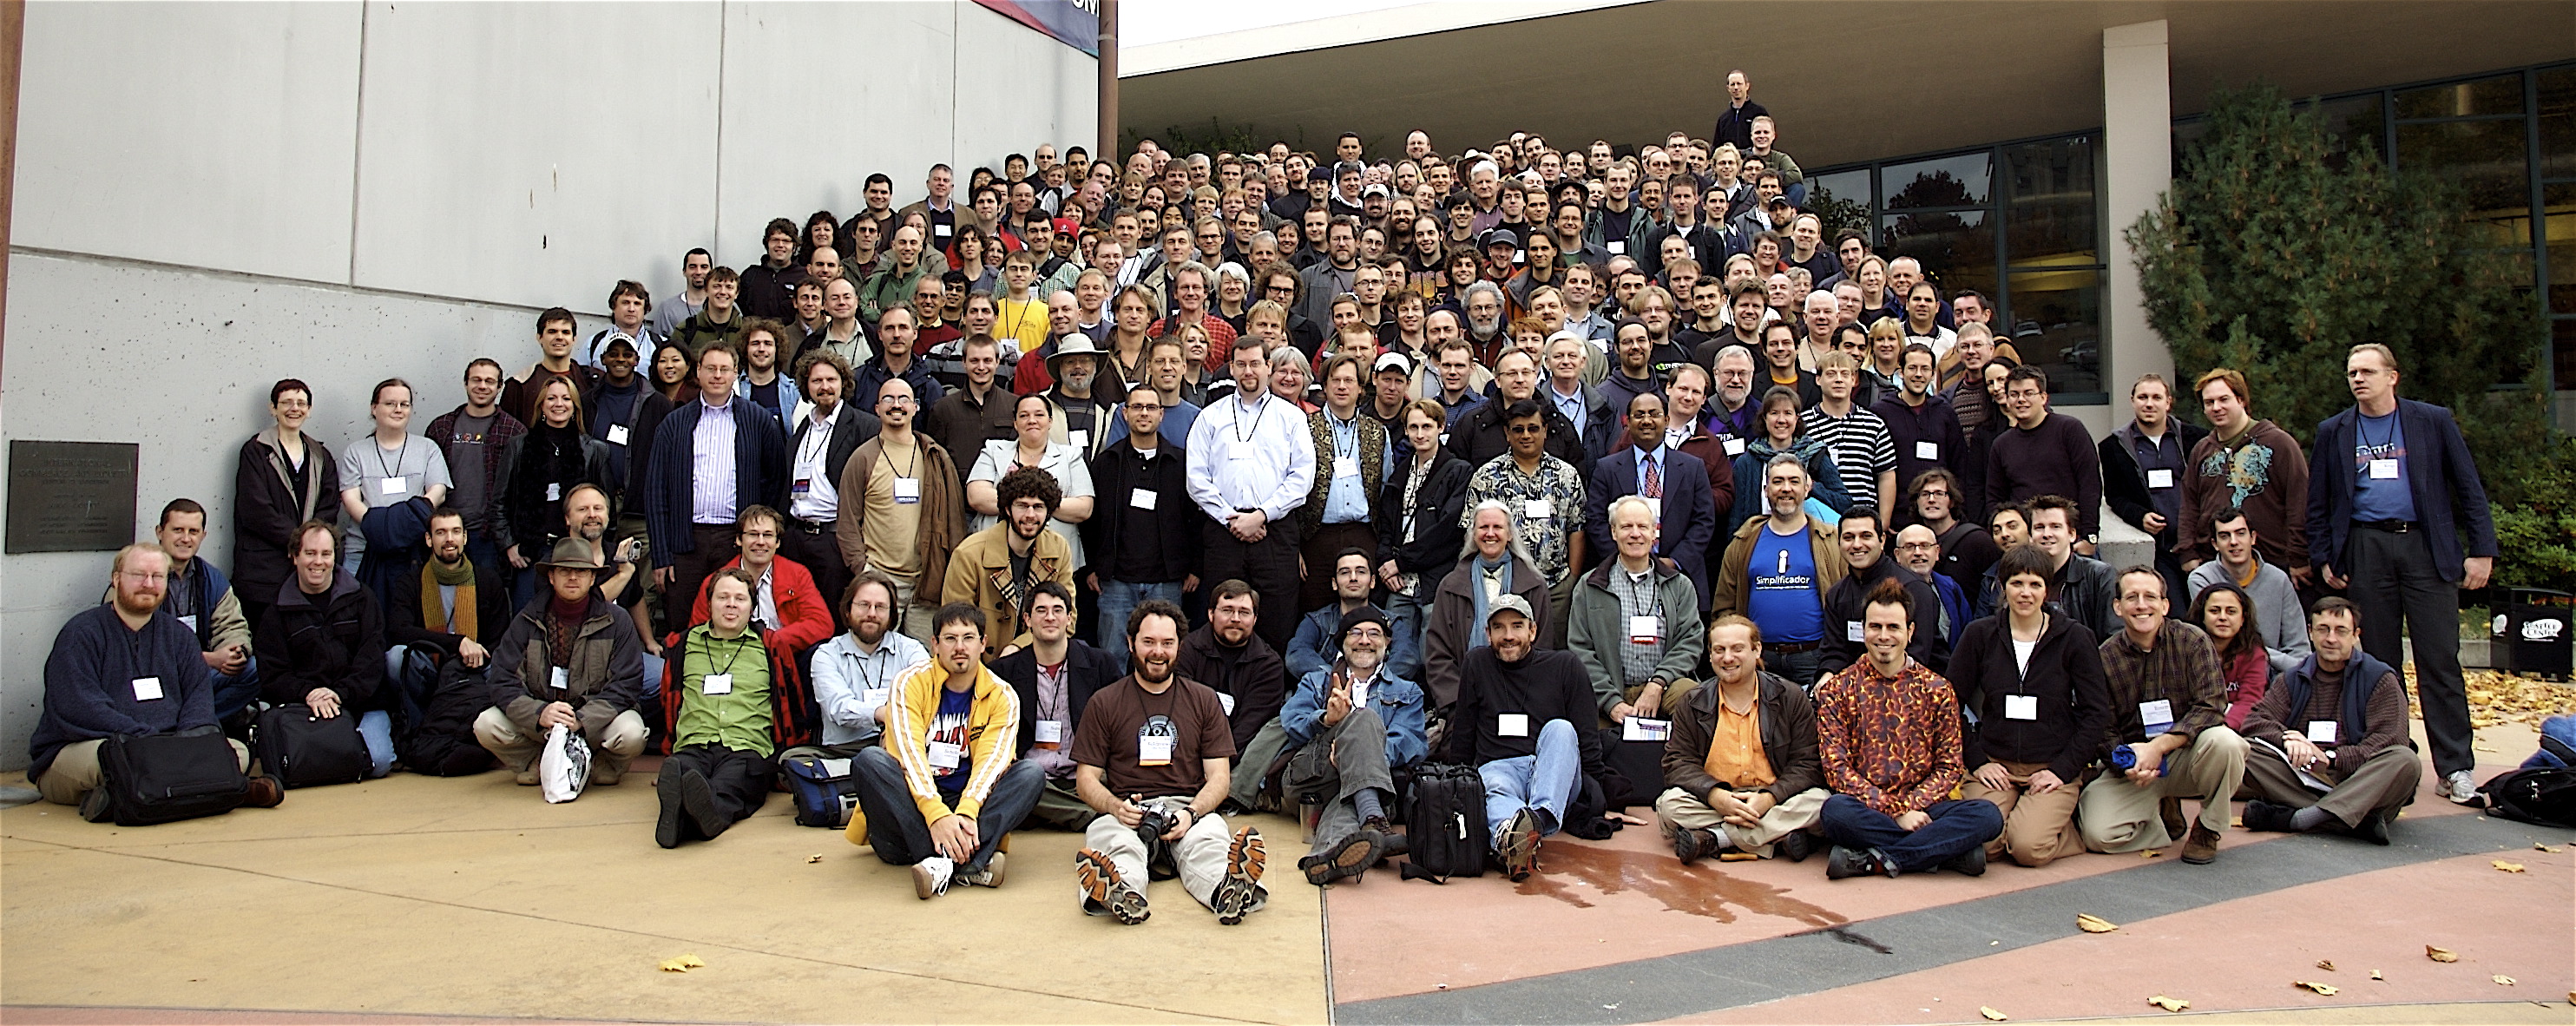 Group Picture of Plone Conference 2006